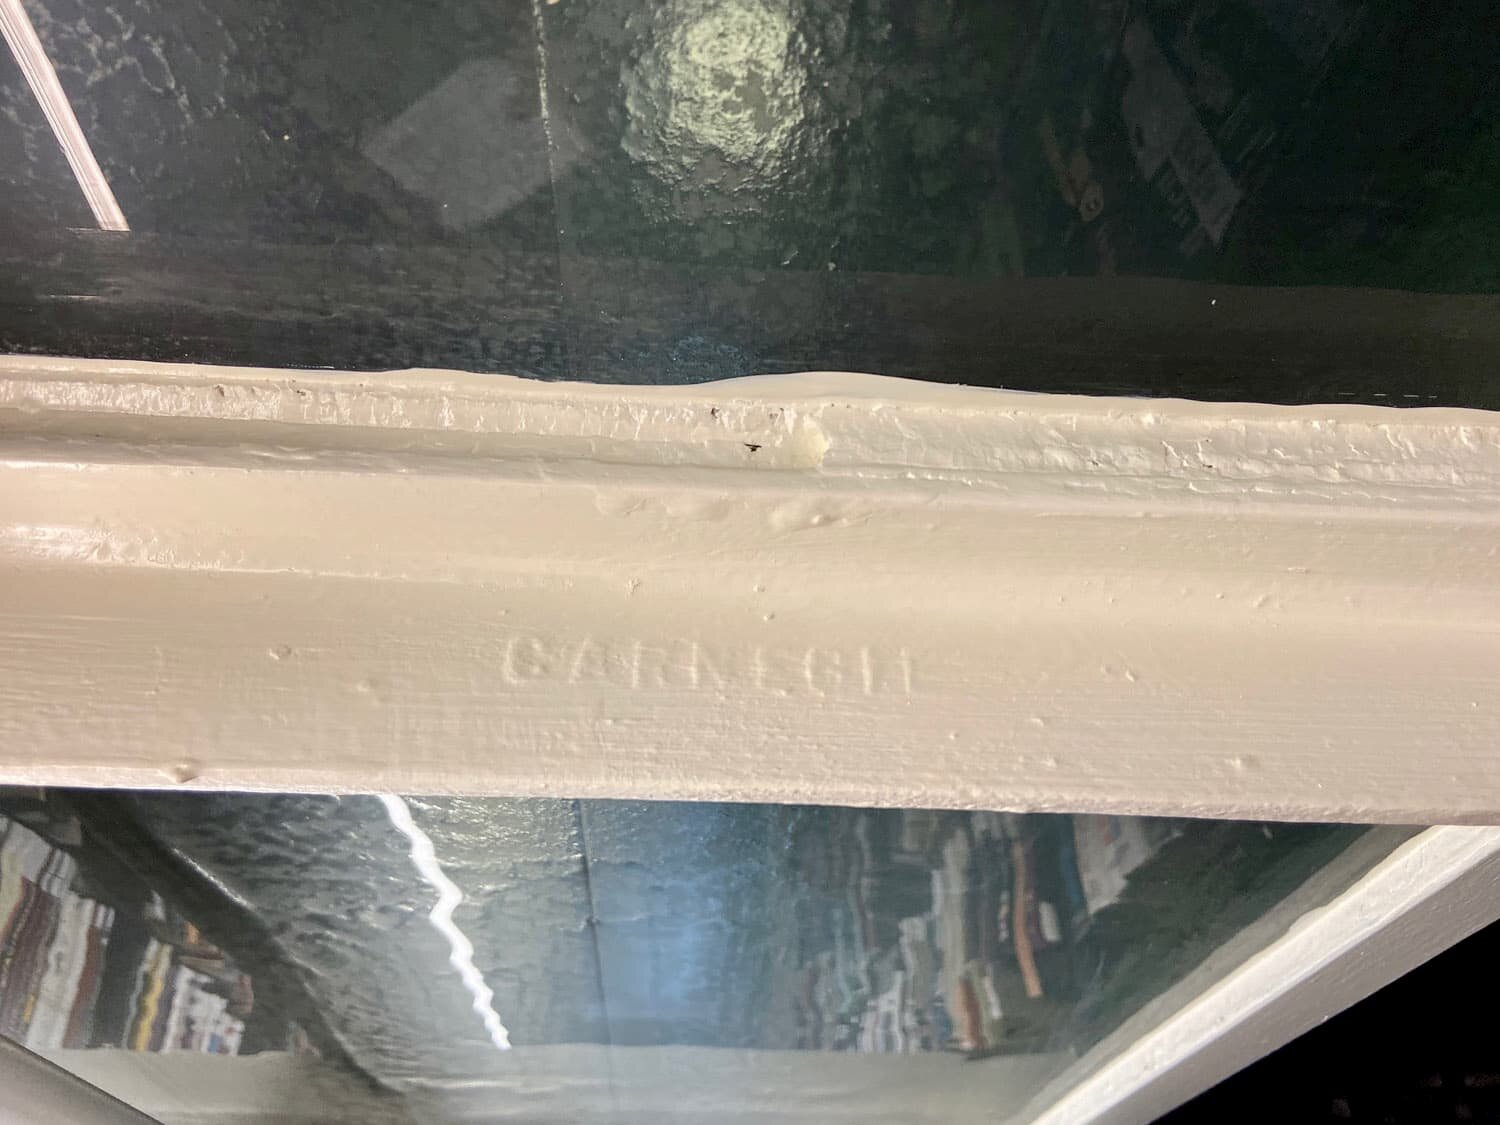  Carnegie steel was used for building the library. Some beams stamped with Carnegie’s name are visible in the building. 